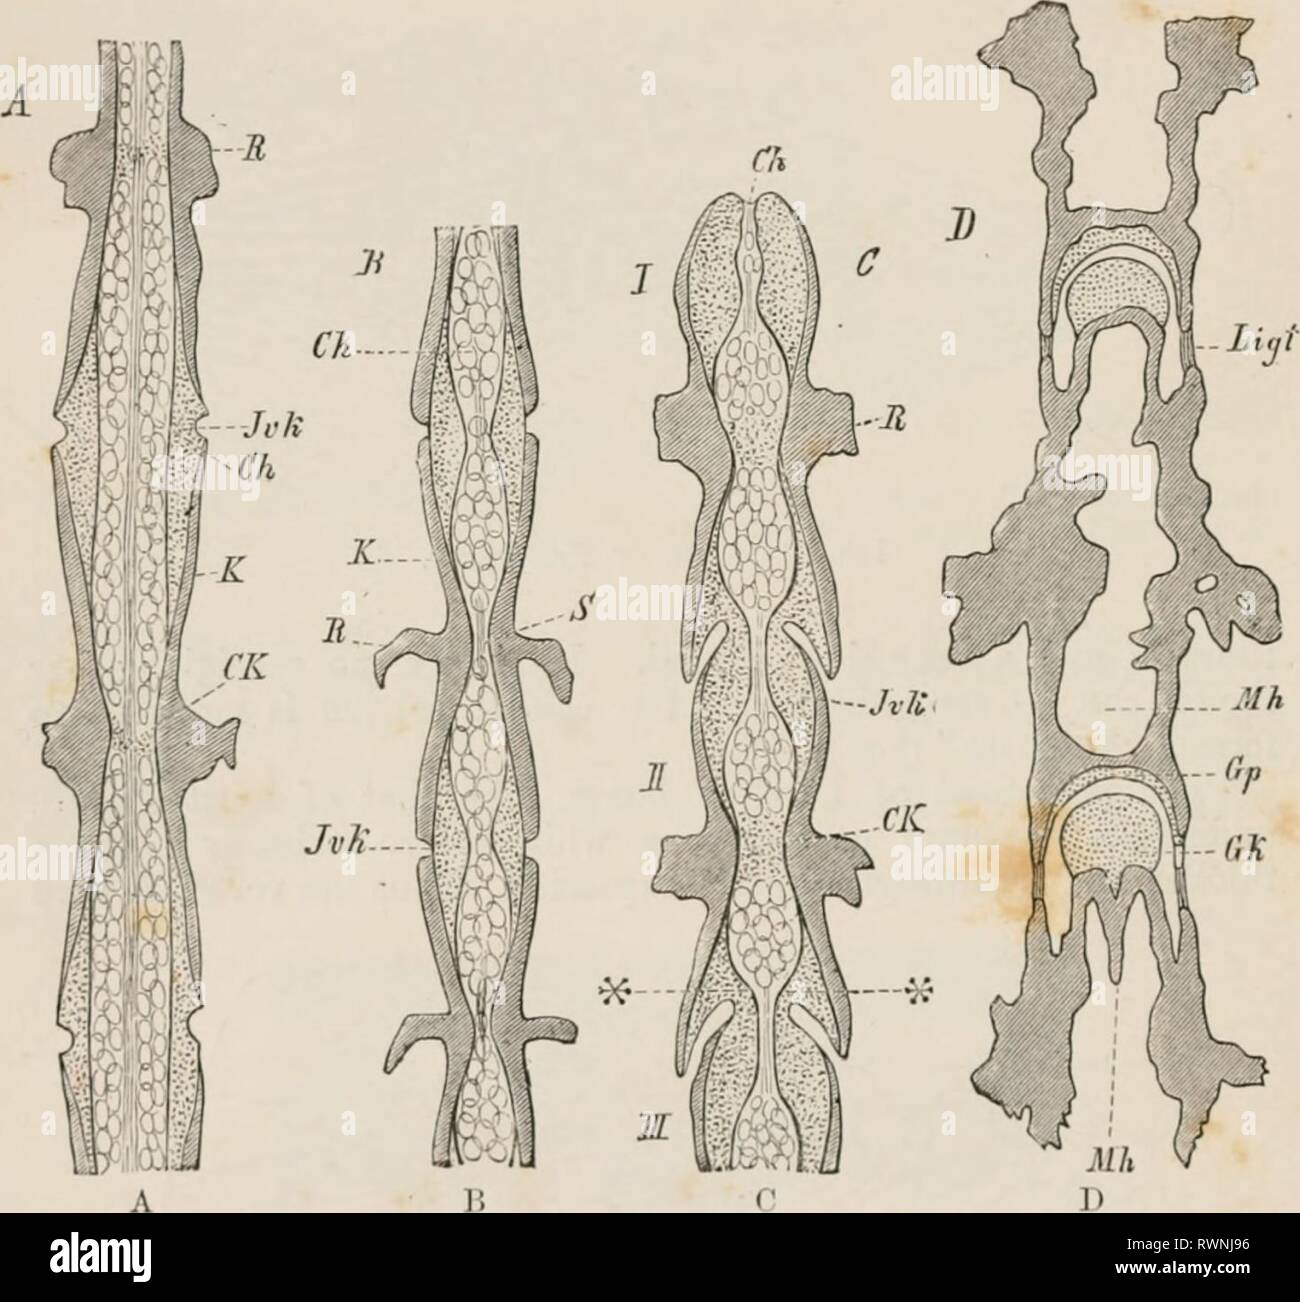 Elements of the comparative anatomy Elements of the comparative anatomy of vertebrates elementsofcompar00wied Year: 1886  40 ( (».M 1'AILVTIVE AXATOM V. periphery occurs in these cartilaginous parts: in the interior of each an articular cavity is formed, so that in the vertebrae of tin- ner Urodeles (Salamandrina perspicillata and certain Tritons) an anterior convexity a ad a posterior concavity may be distin- guished, buth covered with cartilage; they are, therefore, opisthoccelous. A glance at Fig. 31,'A to D, will make this clear.    l'f.. '.I. Ll l, Si,&lt; ilnx TIIIIOM.I' 'ilir. VERTEB Stock Photo